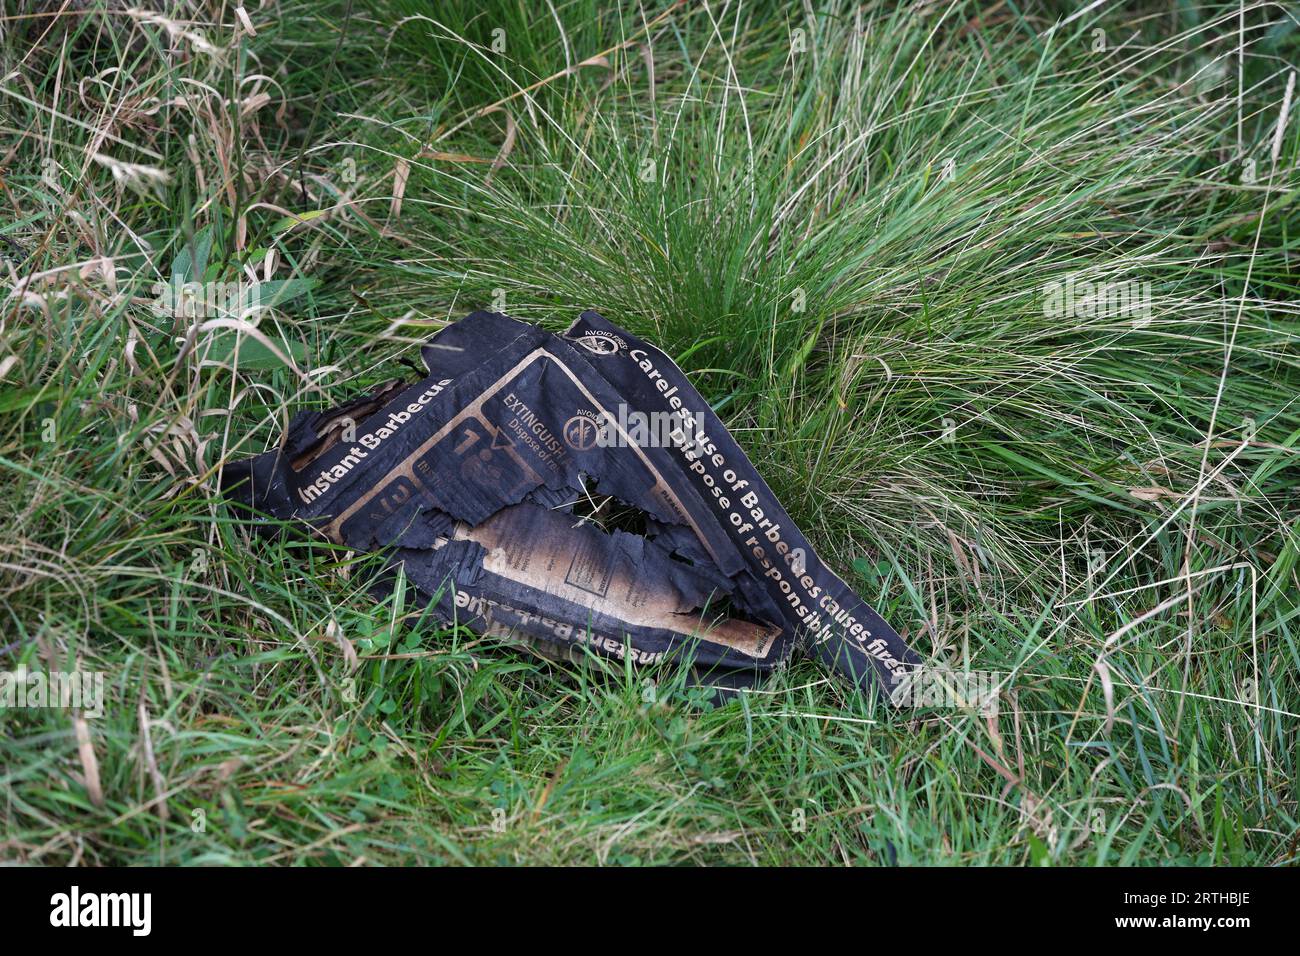 Irresponsibly dumped burned disposable barbeque packaging with warnings that have been ignored, Teasdale, County Durham, UK Stock Photo